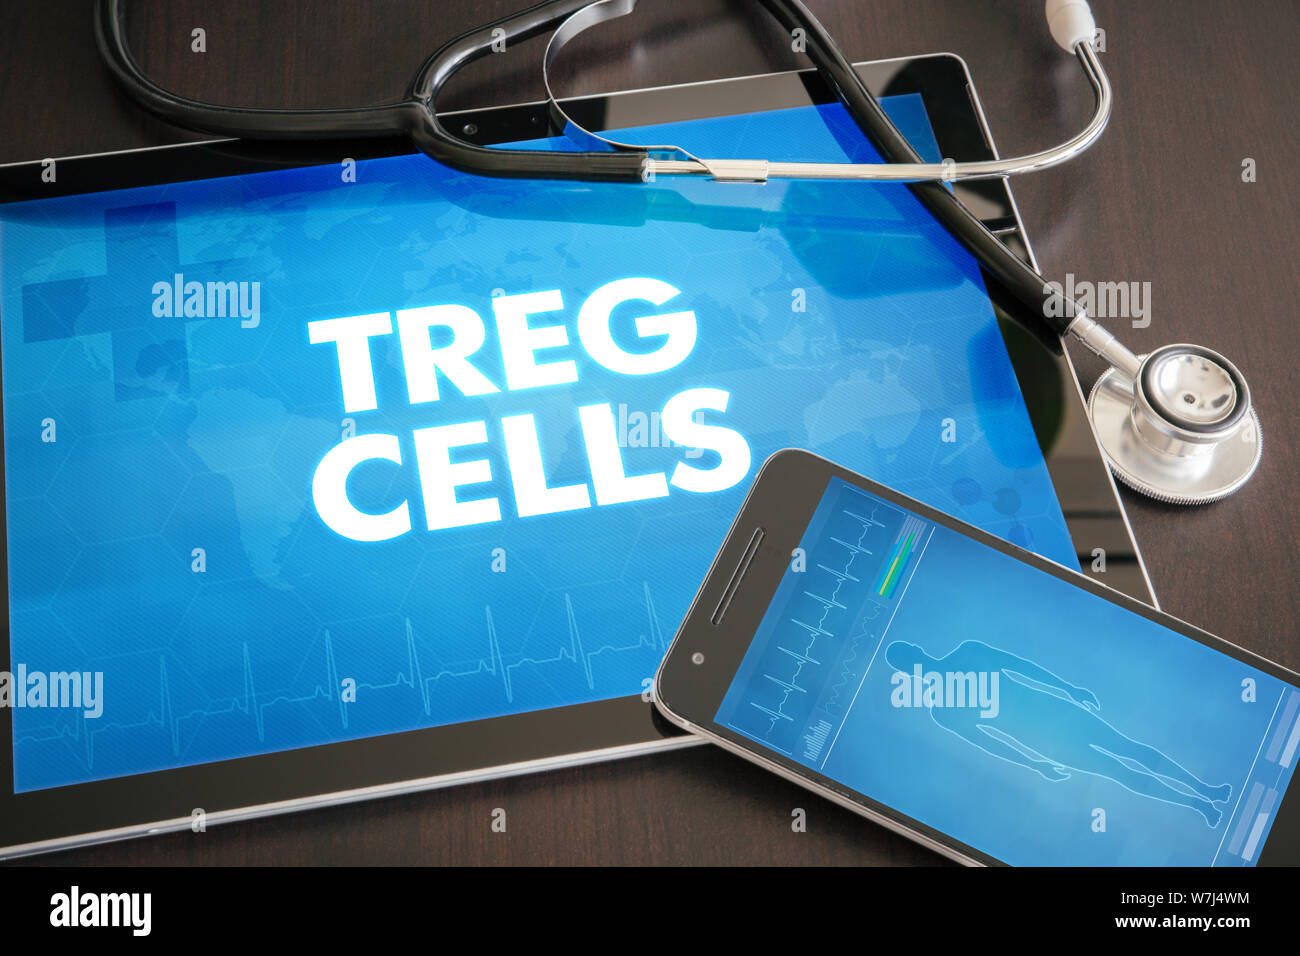 Treg cells (gastrointestinal disease related) diagnosis medical concept on tablet screen with stethoscope. Stock Photo